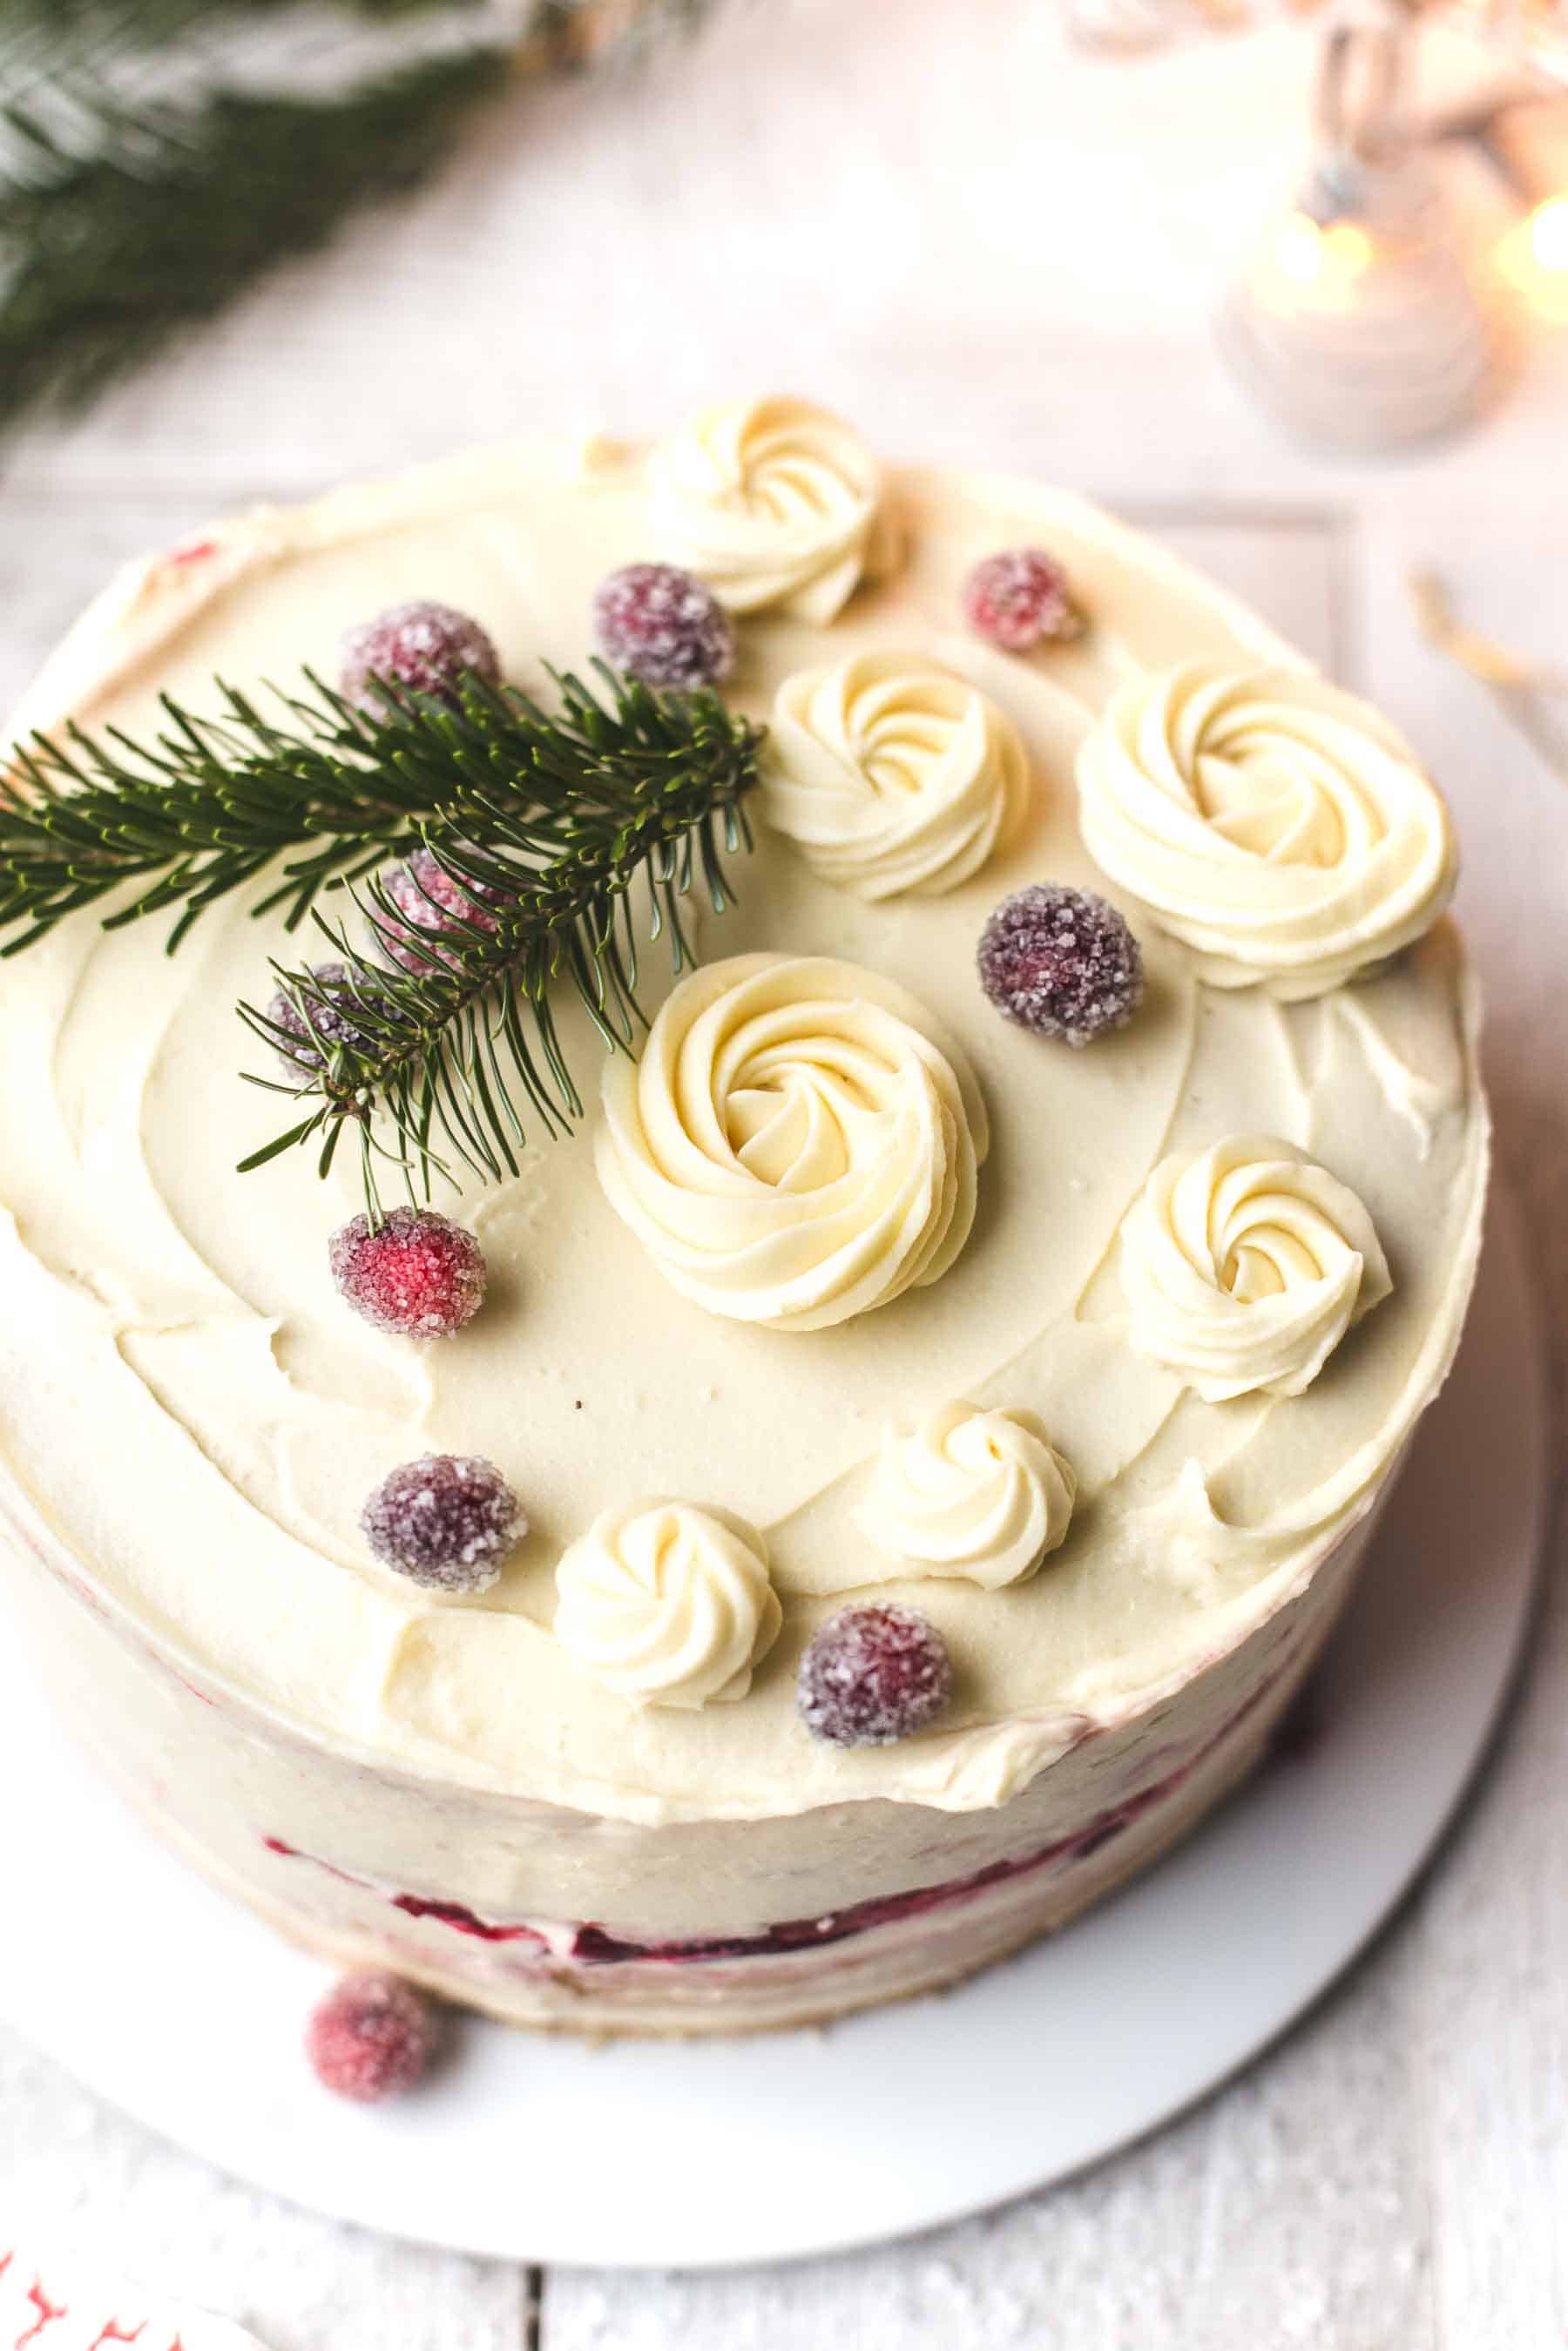 Cranberry Orange Cake with White Chocolate Frosting